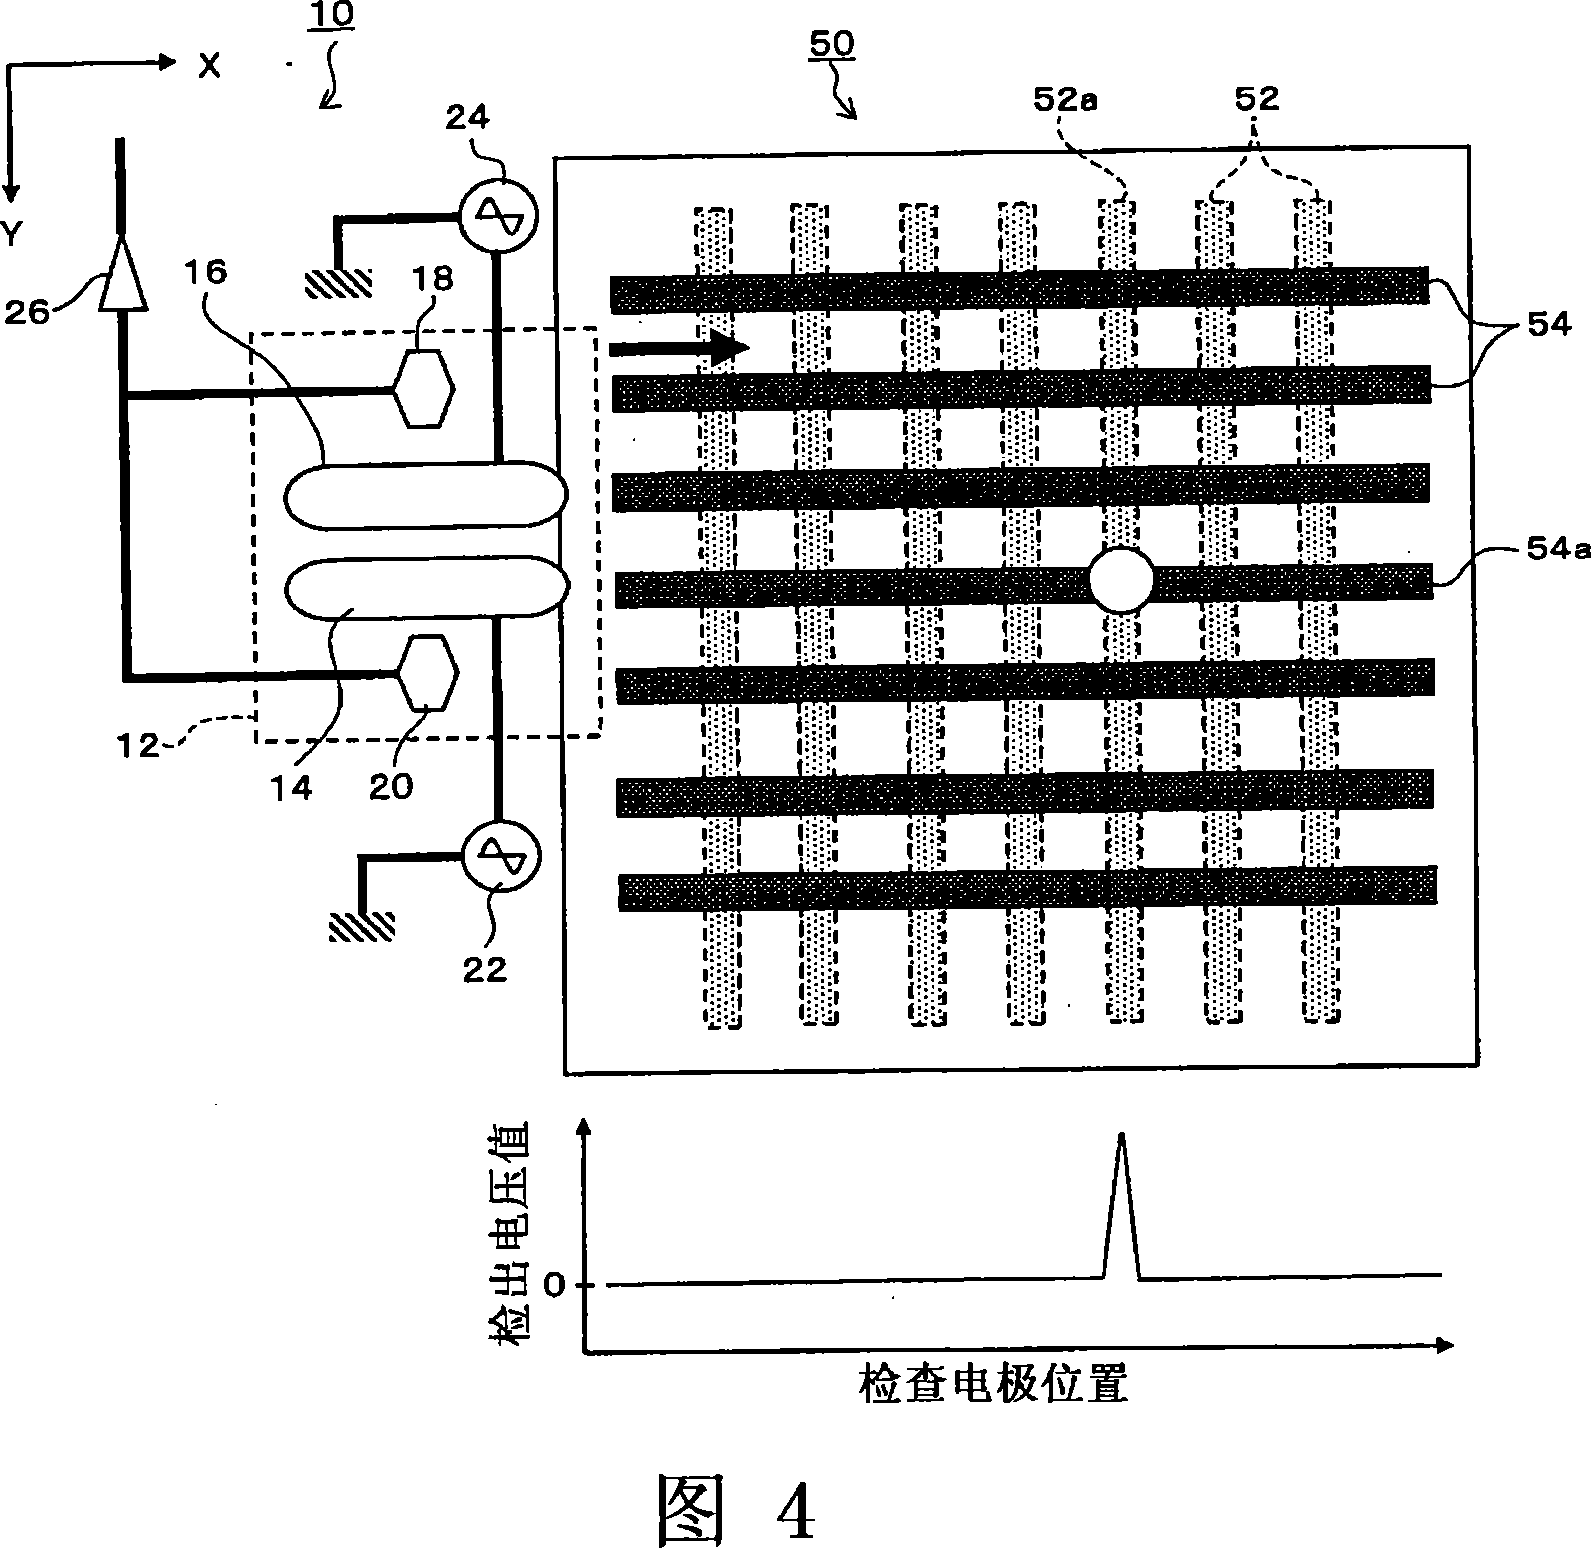 Inspection apparatus for pattern